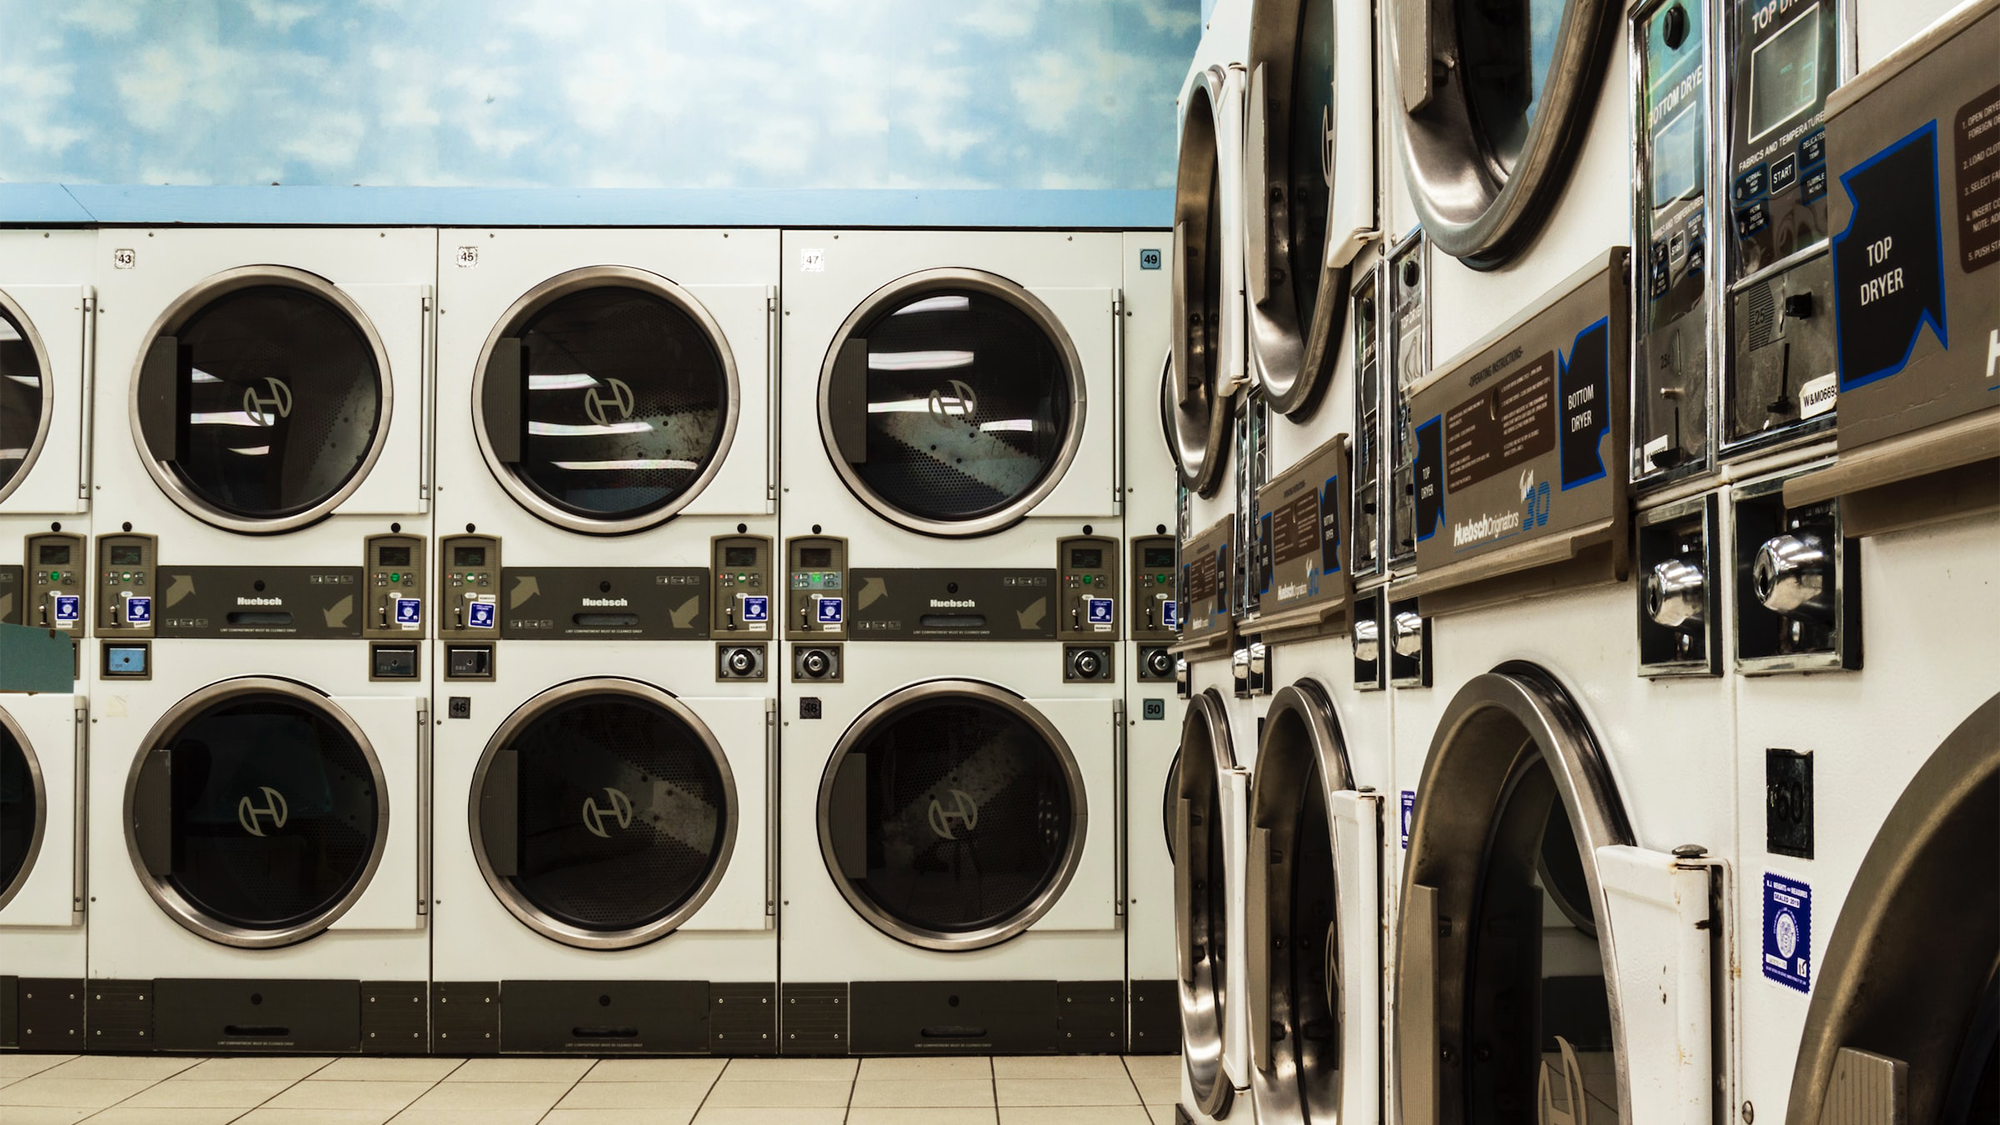 A bank of washing machines in a laundromat